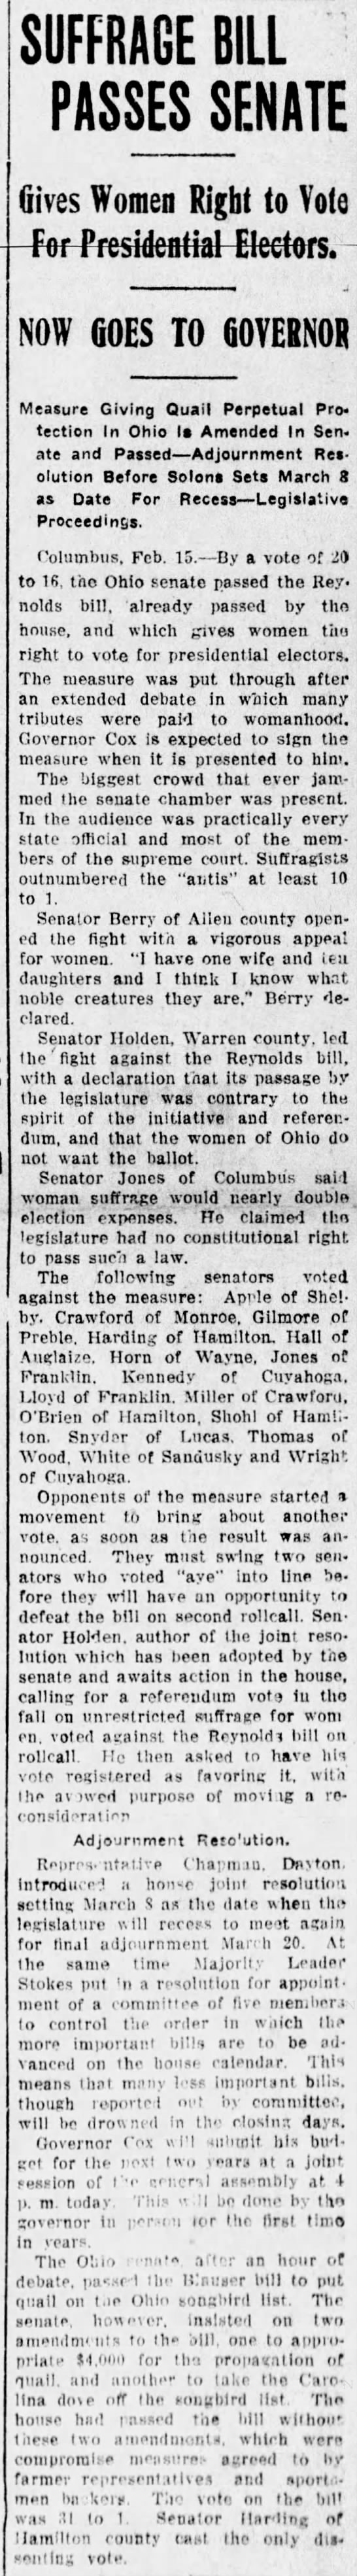 Ohio women are given the right to vote for presidential electors, 1917 - 